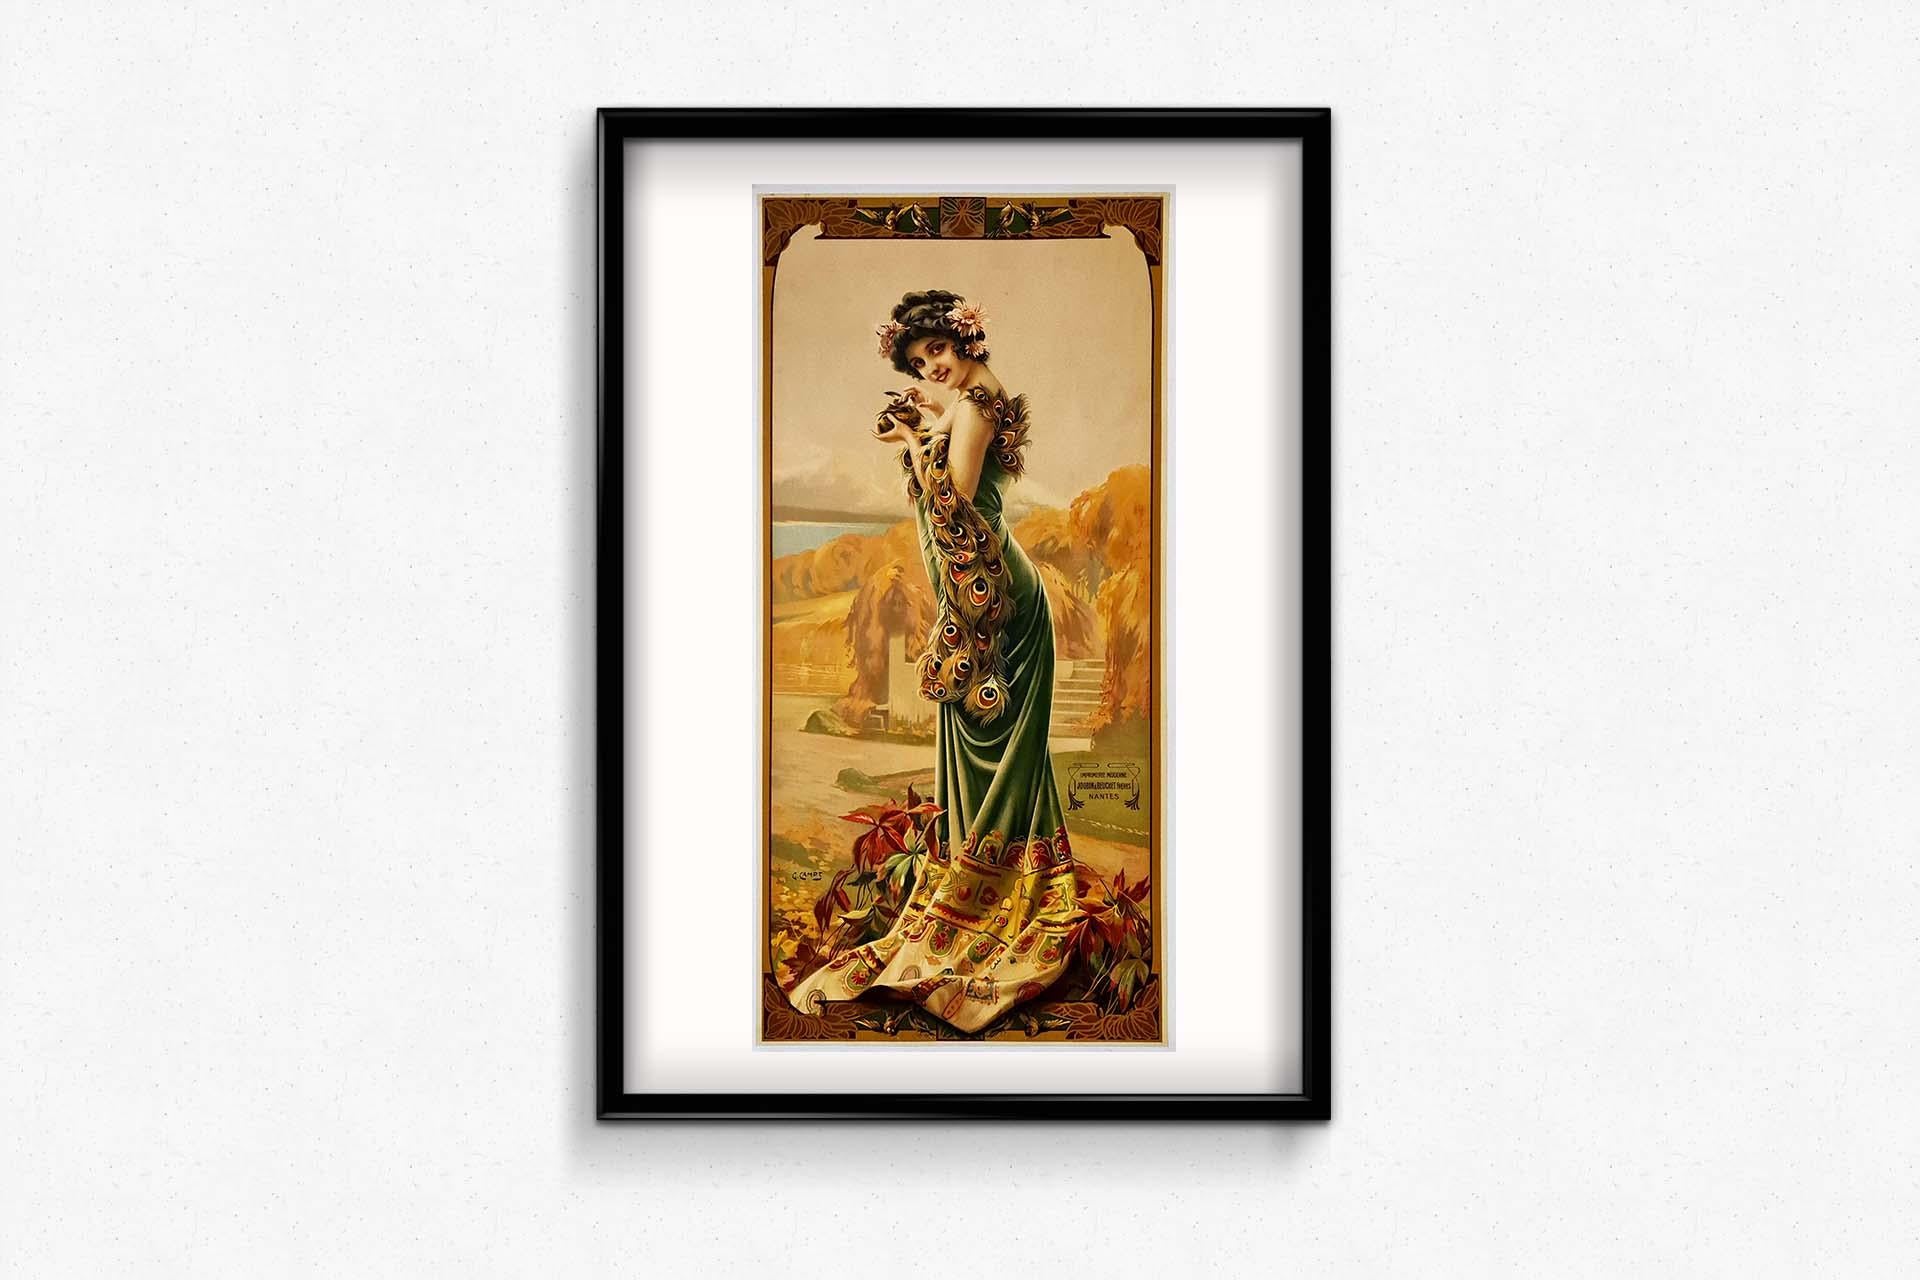 1904 Original Art Nouveau poster by Camps - Elegant Woman with a Peacock feather For Sale 1